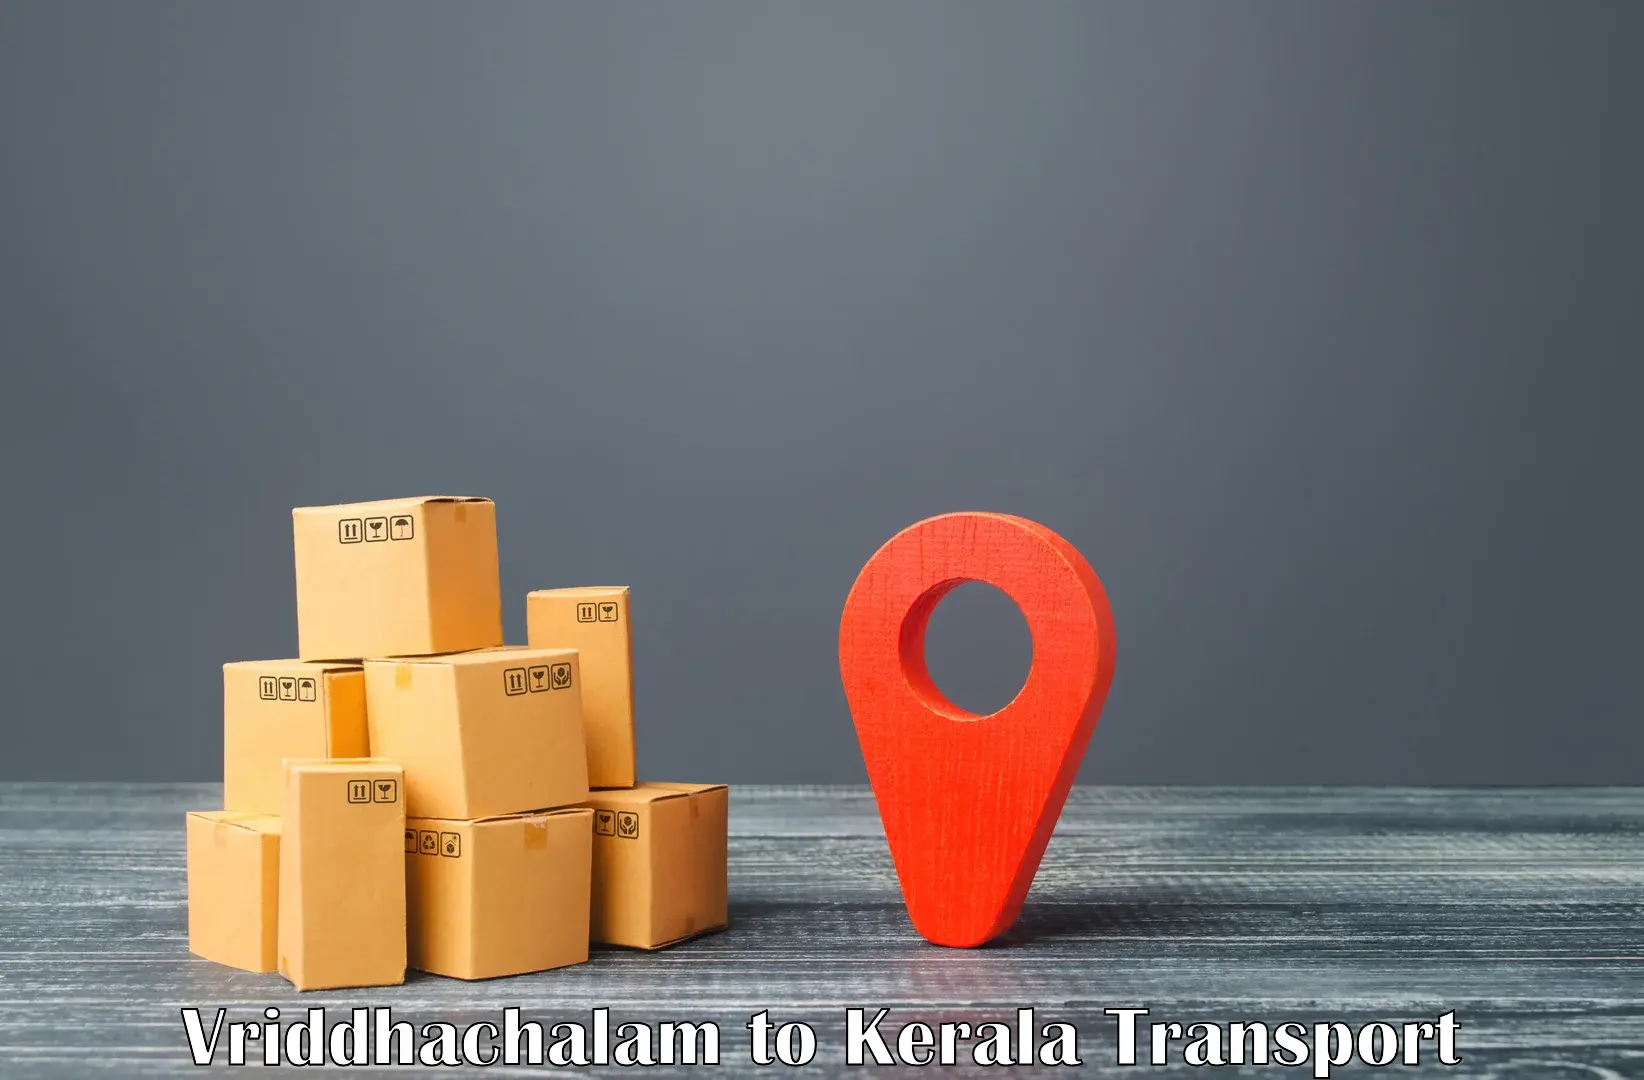 Commercial transport service Vriddhachalam to Kannur